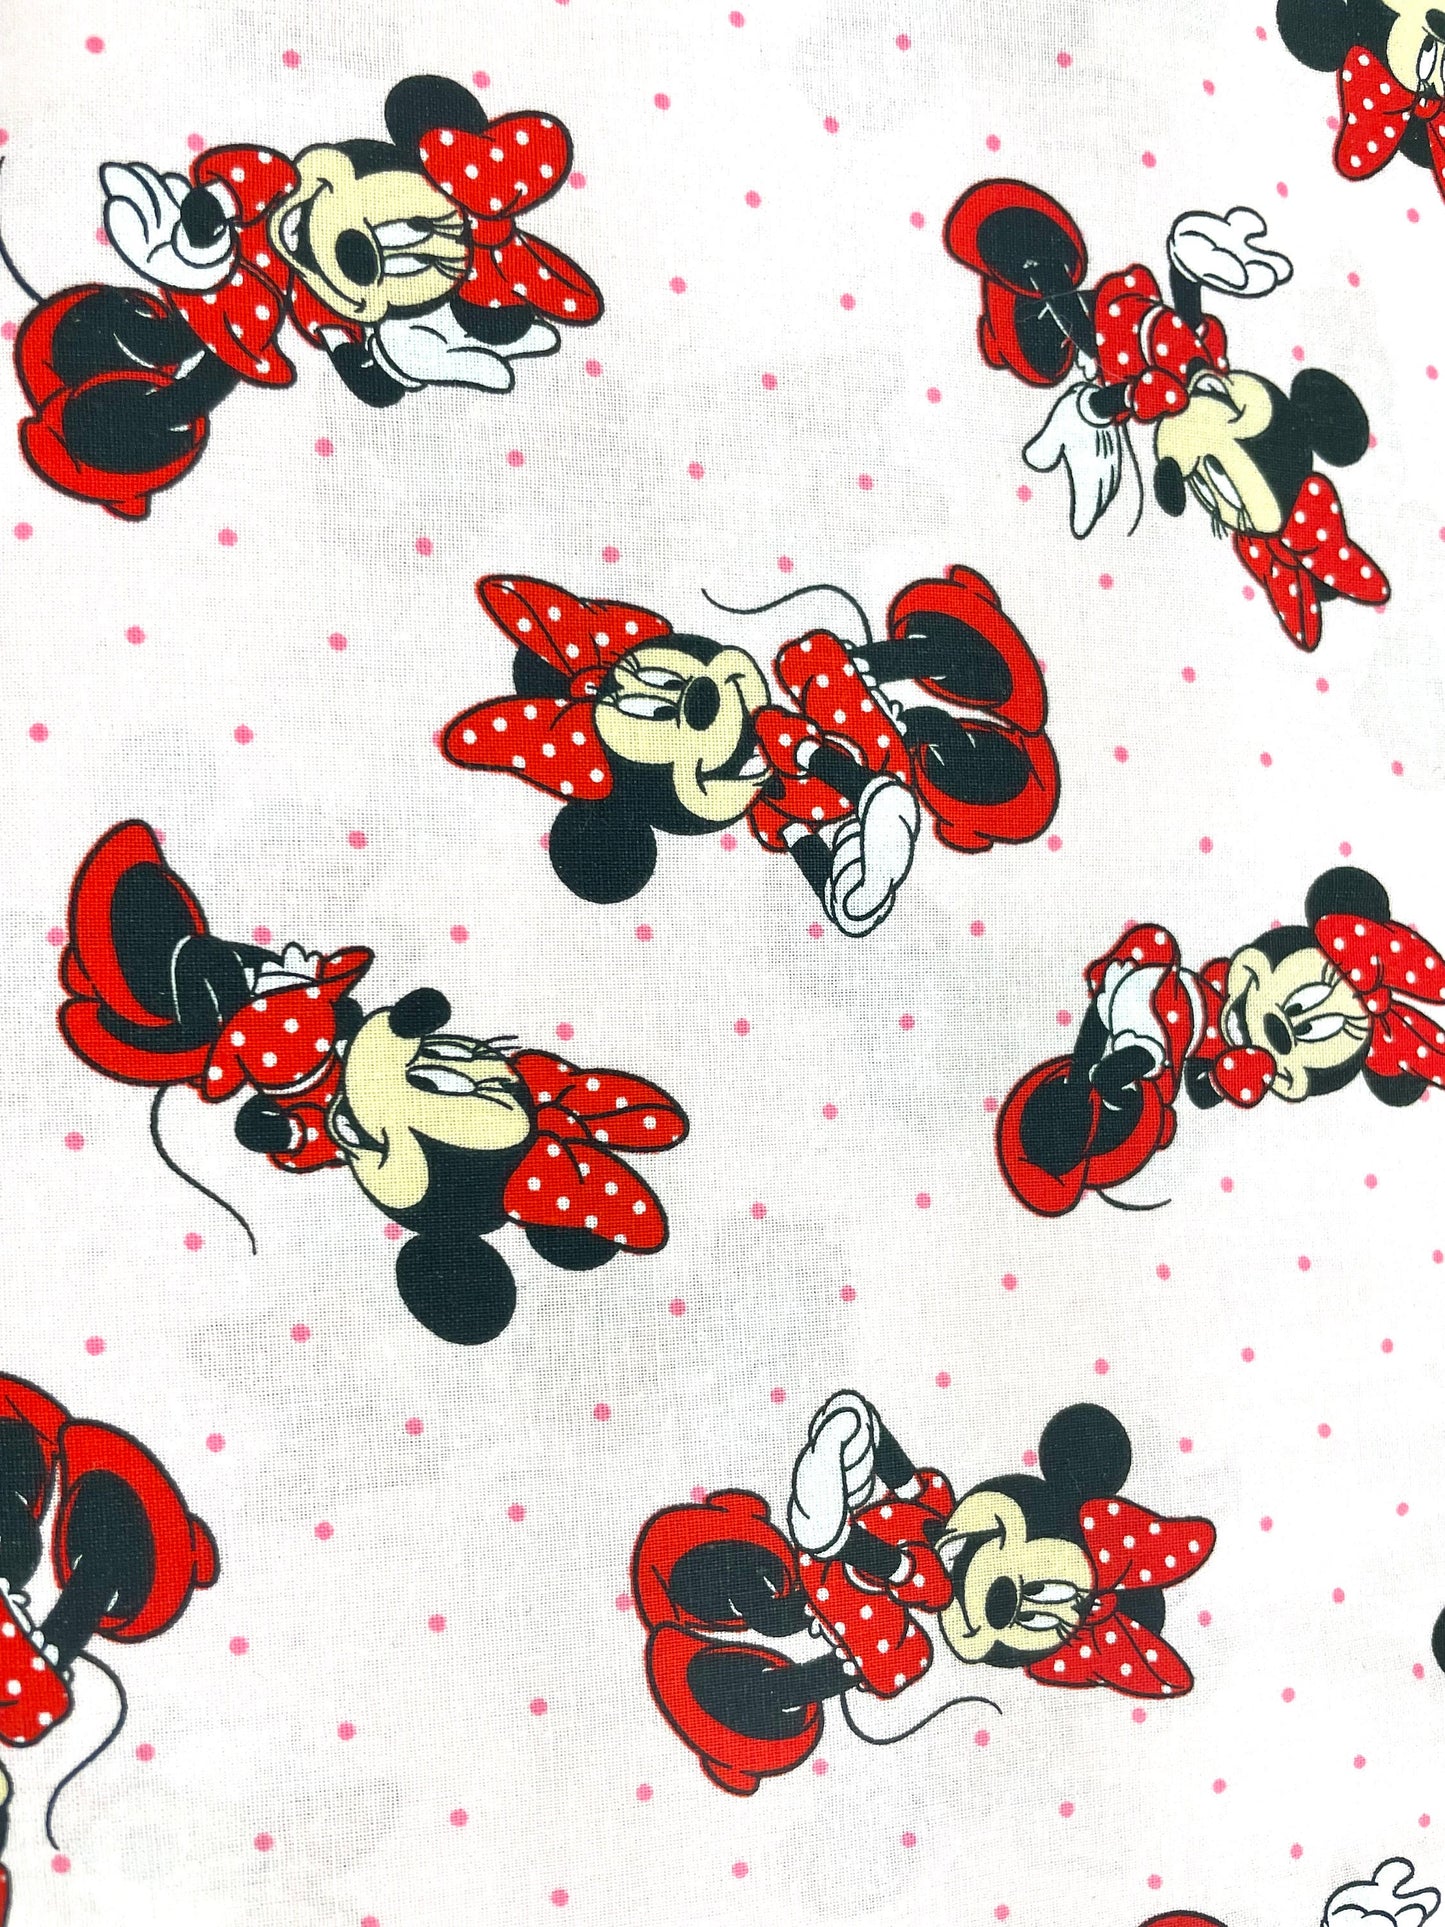 Cutest Minnie Mouse reversible blanket ever!